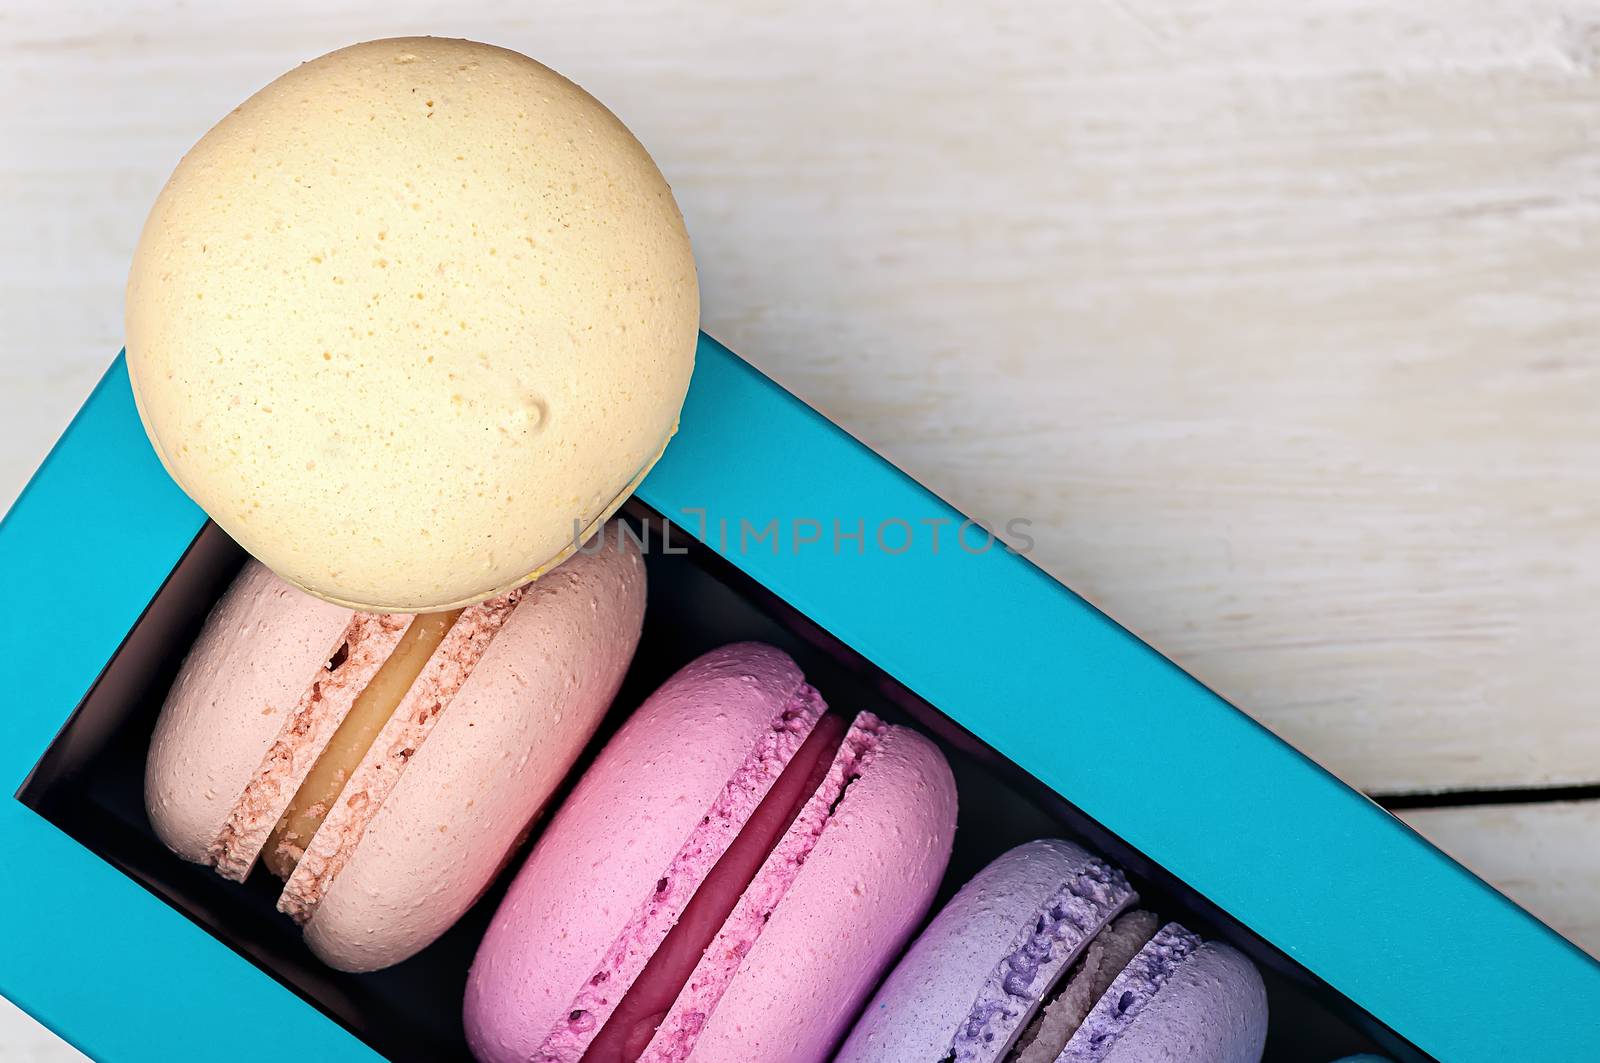 Macaroons in box and one on top  by Cipariss